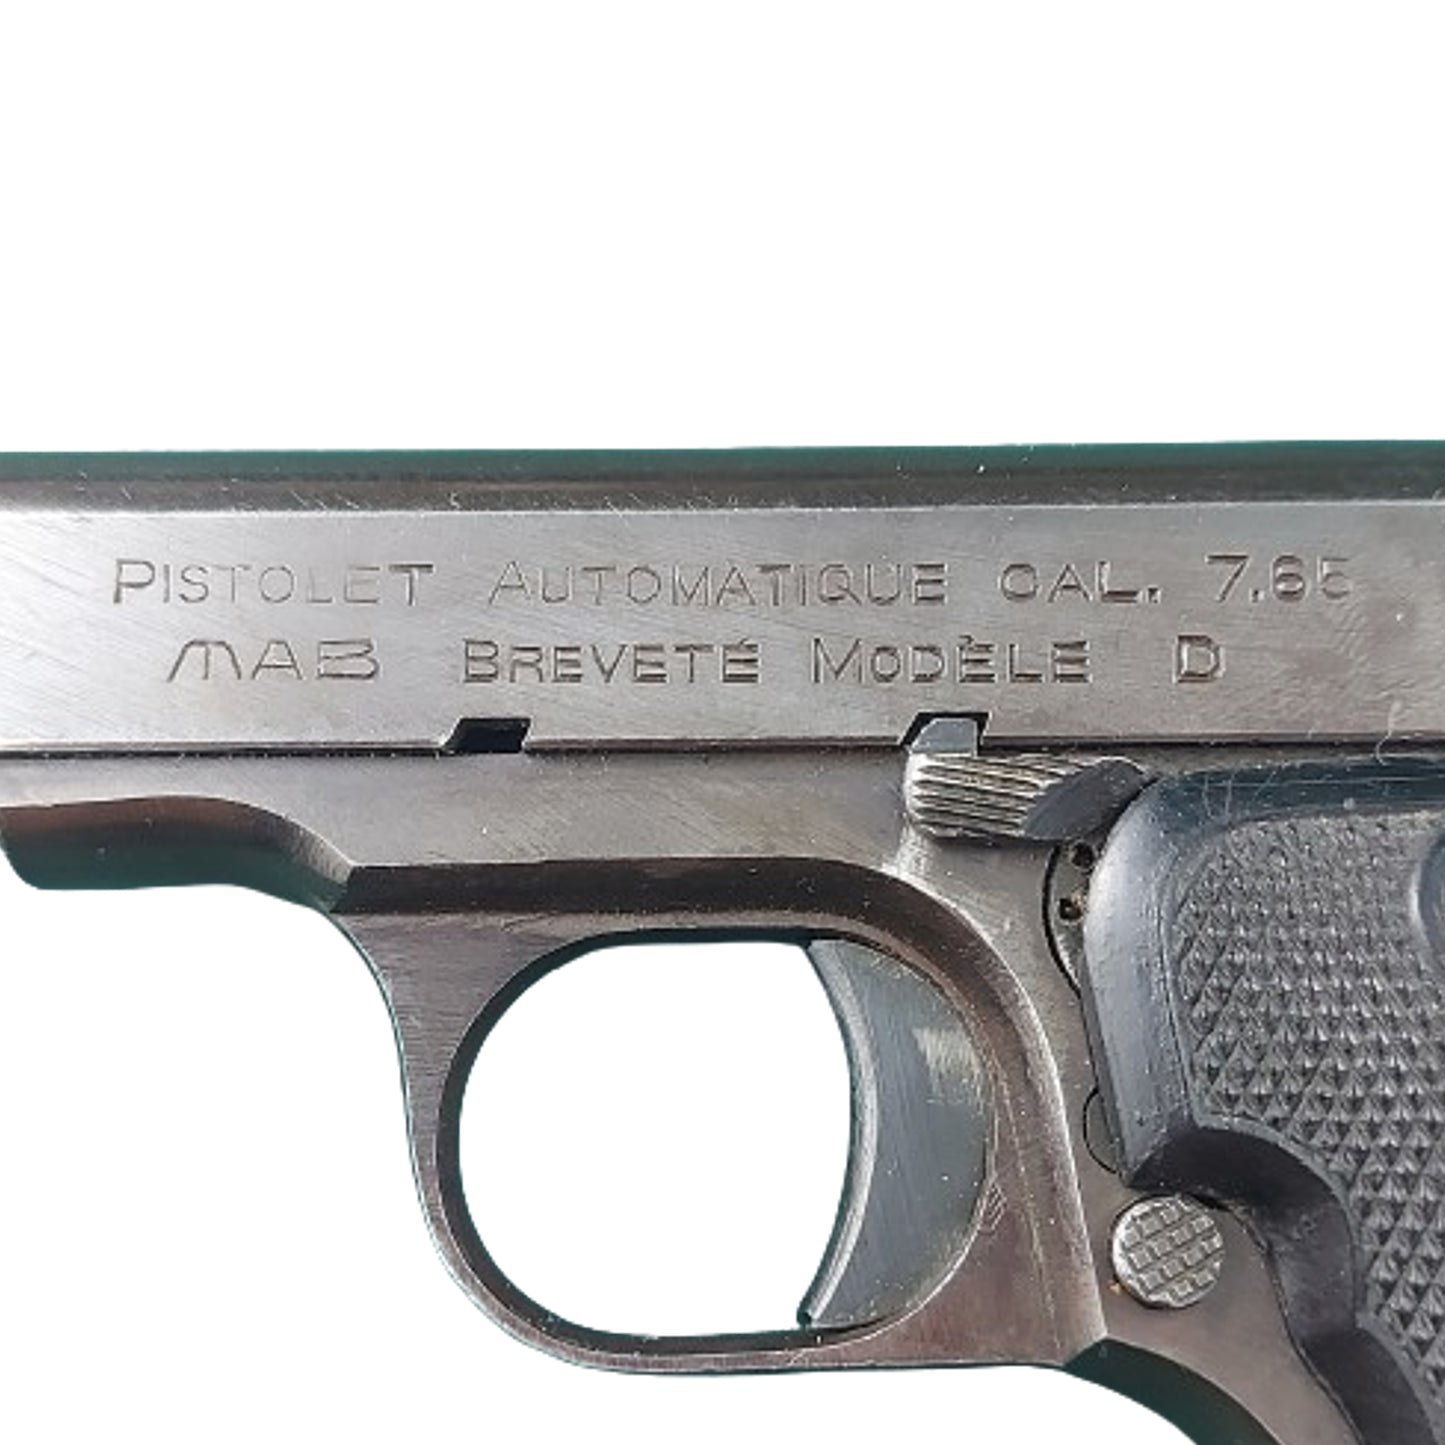 Deactivated WW2 French MAB Model D S//A Service Pistol